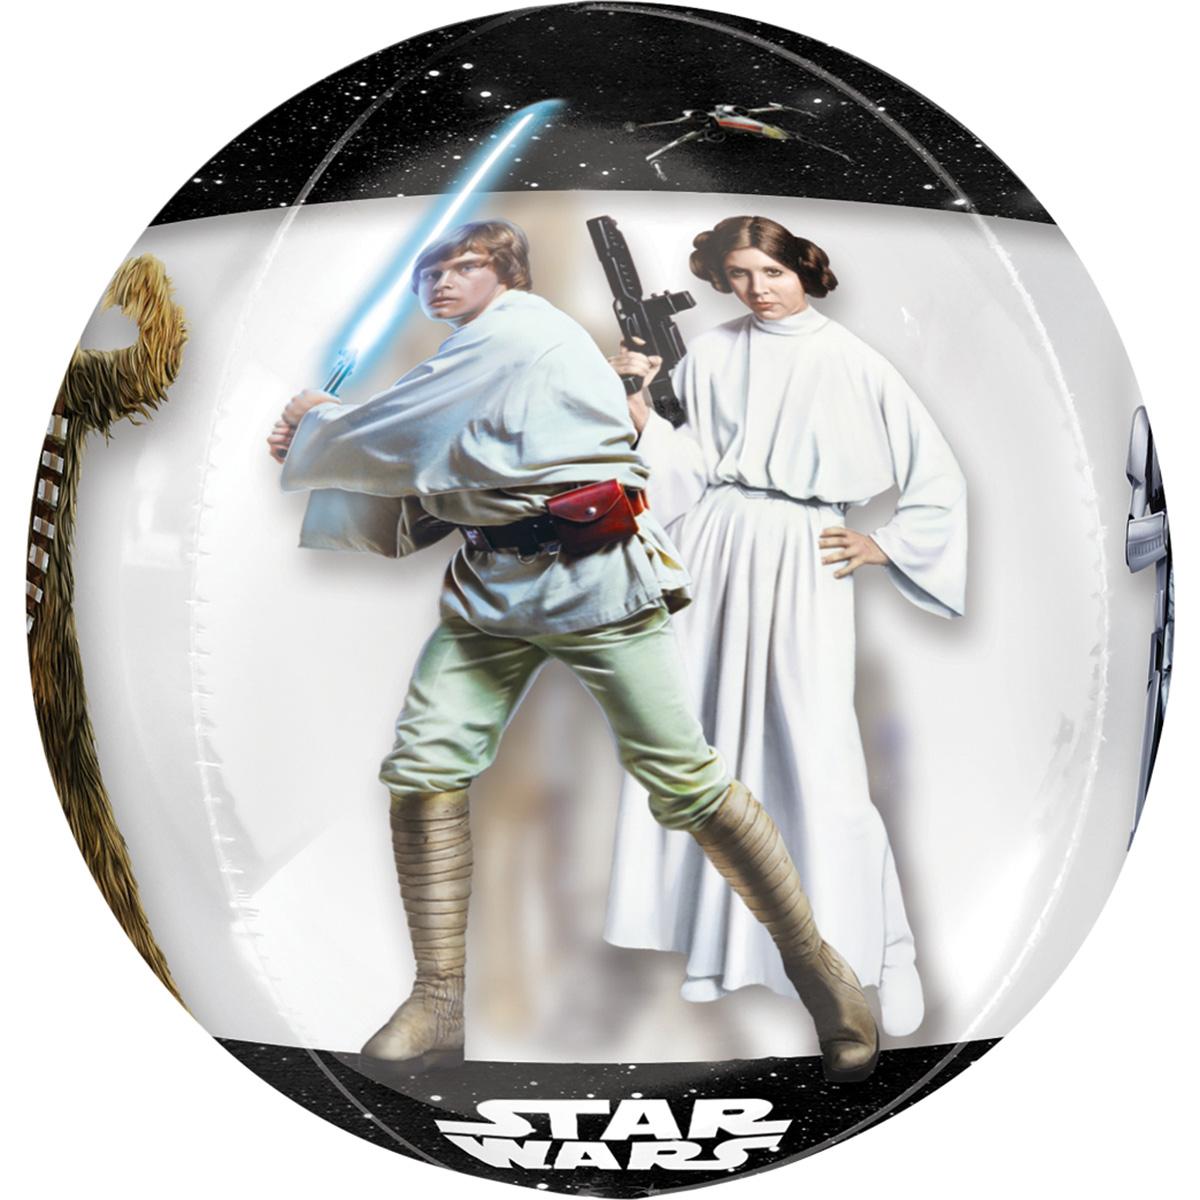 Star Wars Classic Orbz Balloon 38x40cm Balloons & Streamers - Party Centre